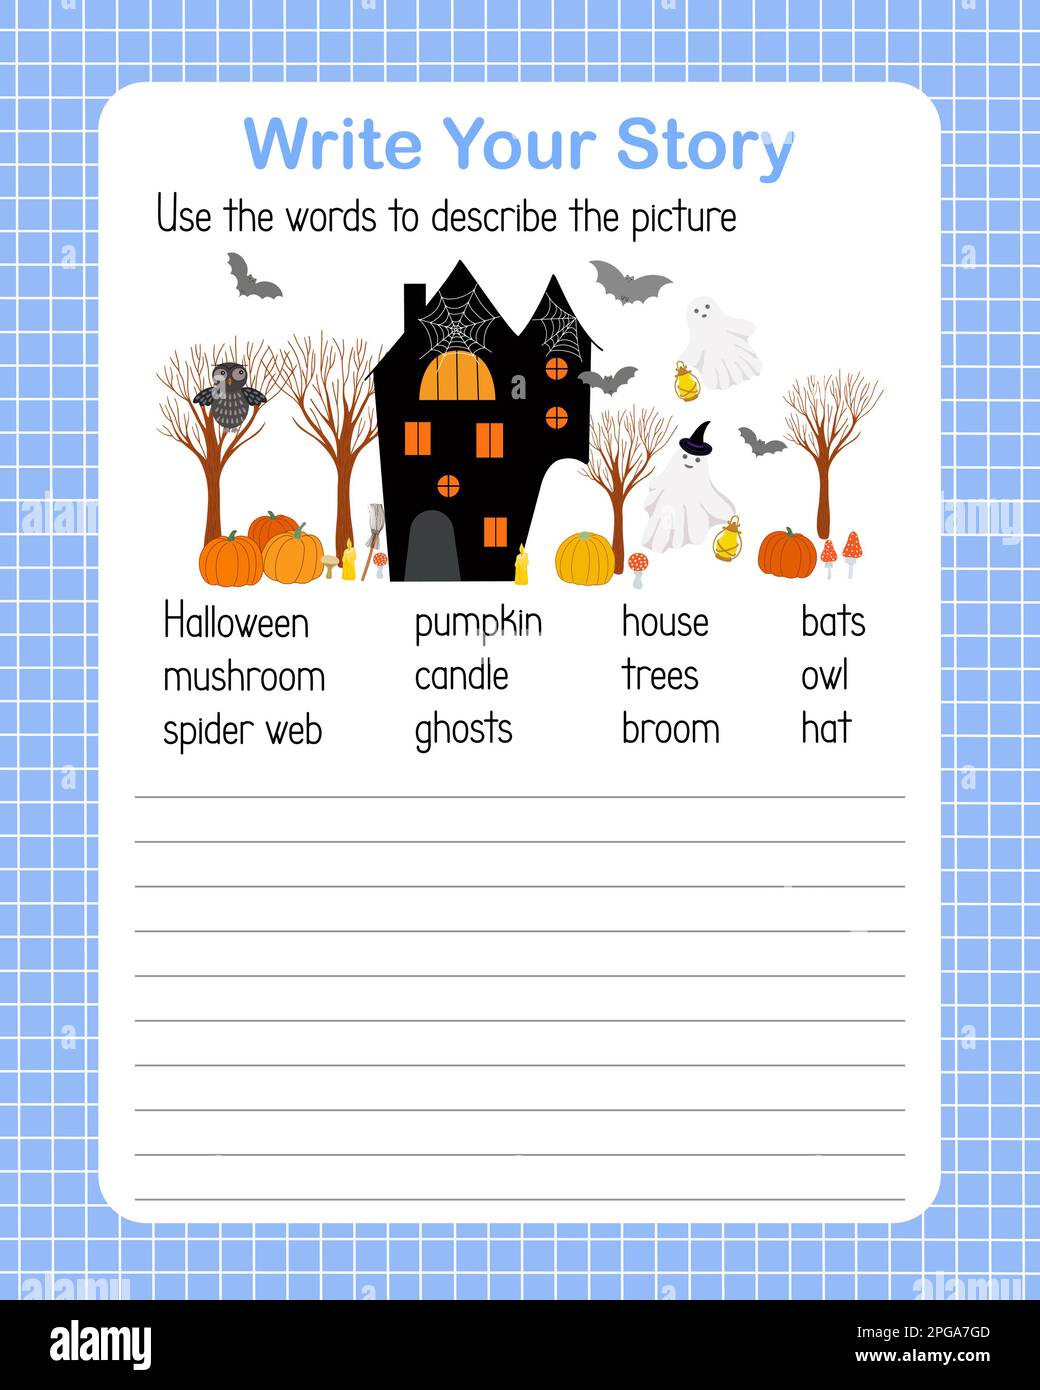 Write a story the English language grammar elementary level for kids, learning concept vector illustration, educational worksheet describe a picture using topical vocabulary words Halloween holiday Stock Vector